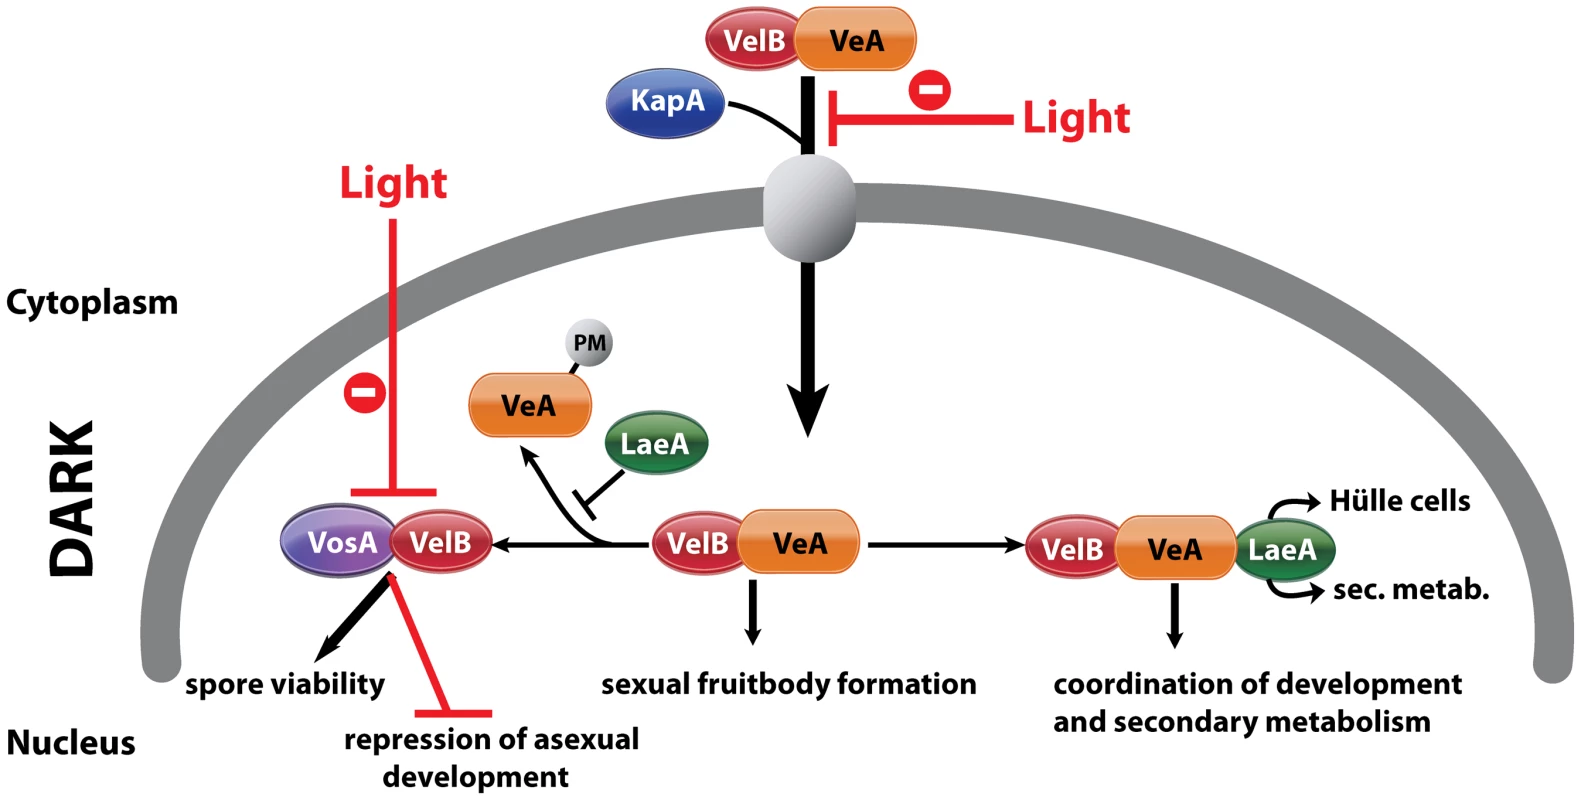 Complexes of velvet family regulatory proteins and LaeA during <i>A. nidulans</i> development.